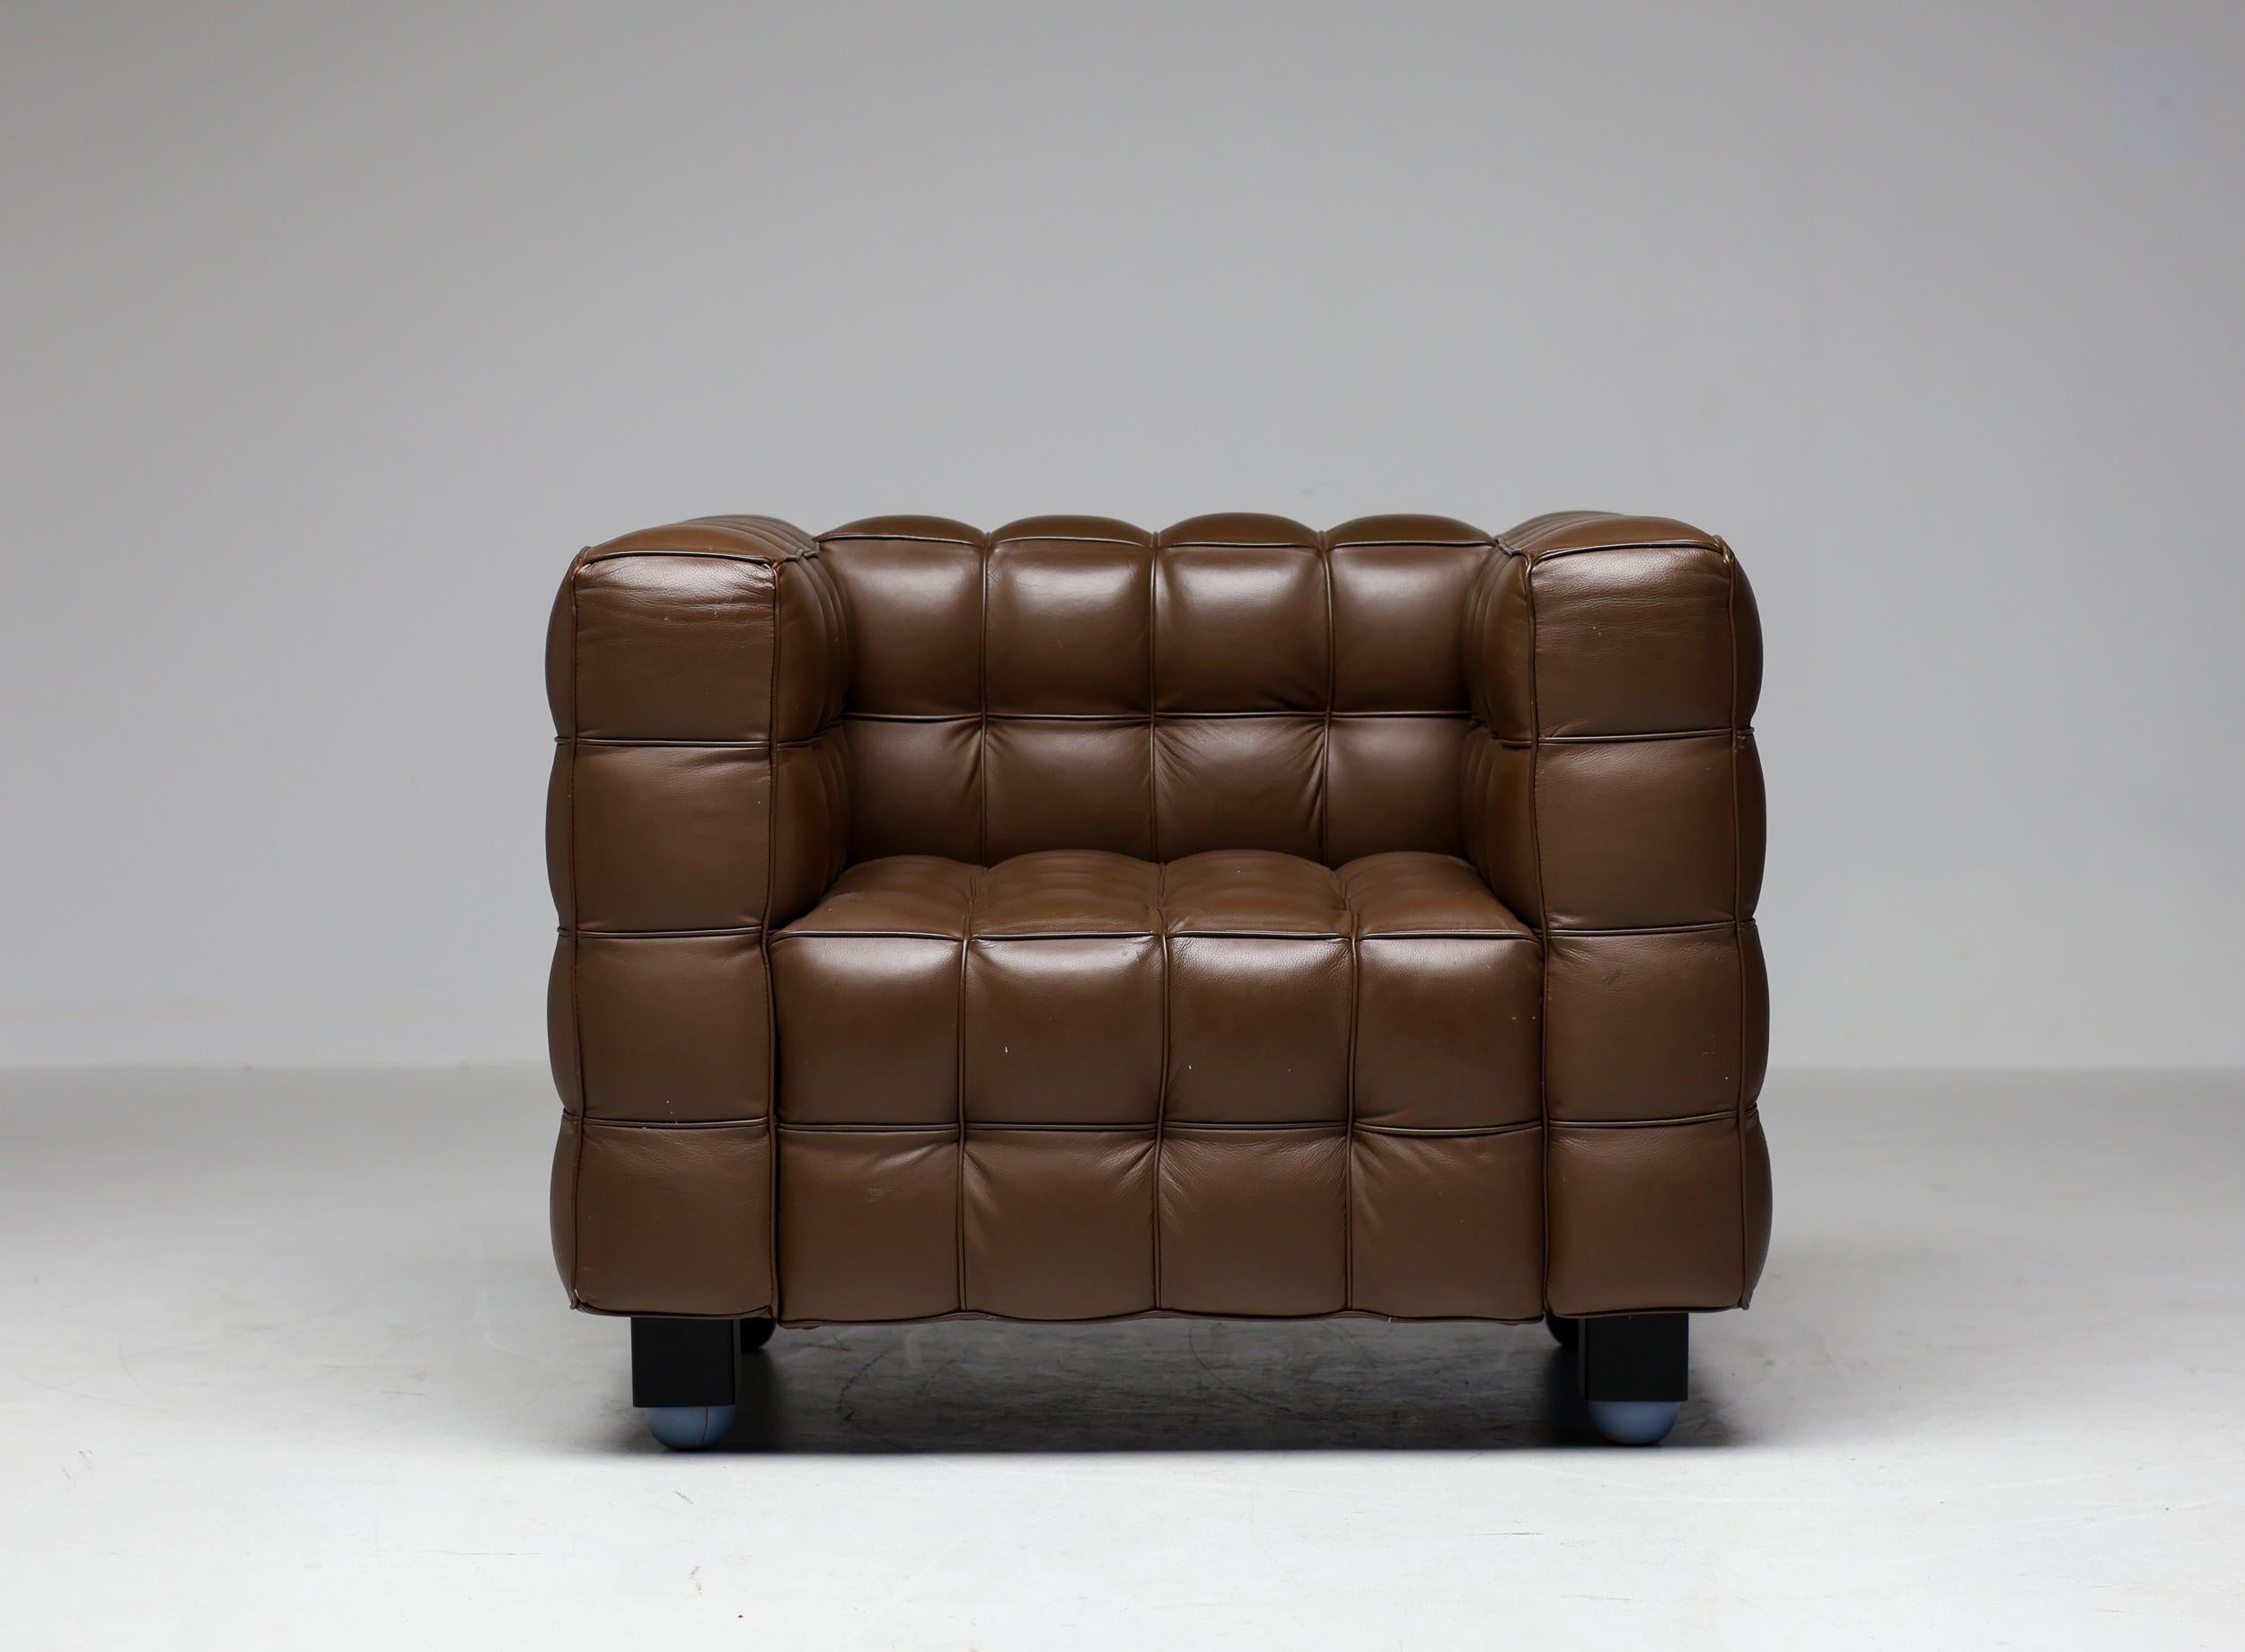 Beautiful vintage chocolate brown leather Kubus sofa 8020 and matching armchair designed by Josef Hoffman and made by Alivar. This set is was lovingly cared for and is in wonderful all original condition.
Alivar Museum catalog with an identical set